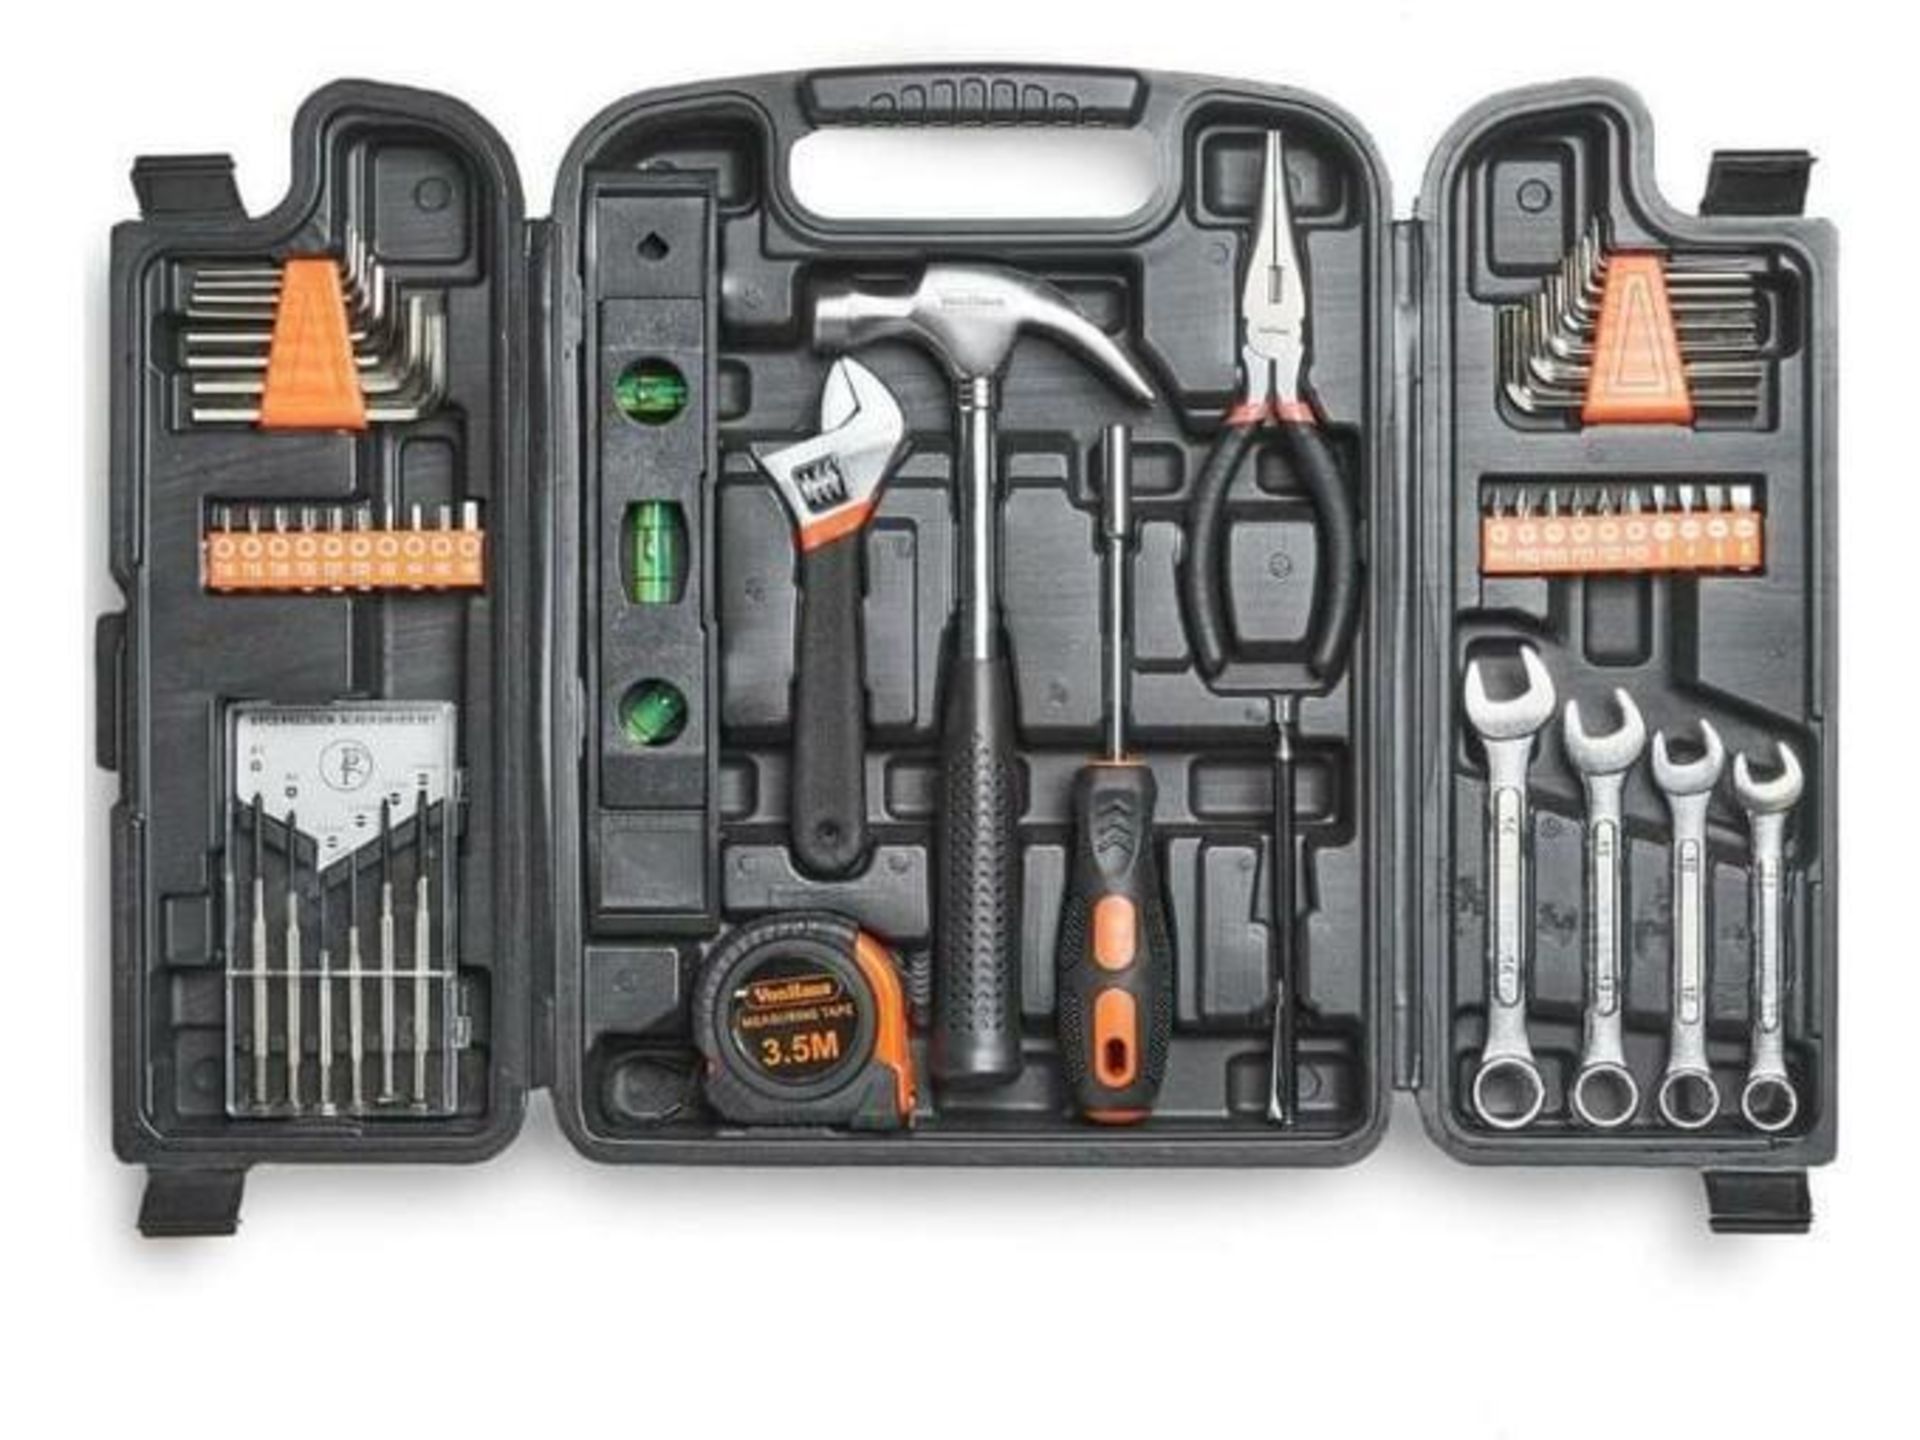 53pc Household Tool Set (ER51) This tool set is the go-to kit for odd jobs and day to day fixes.